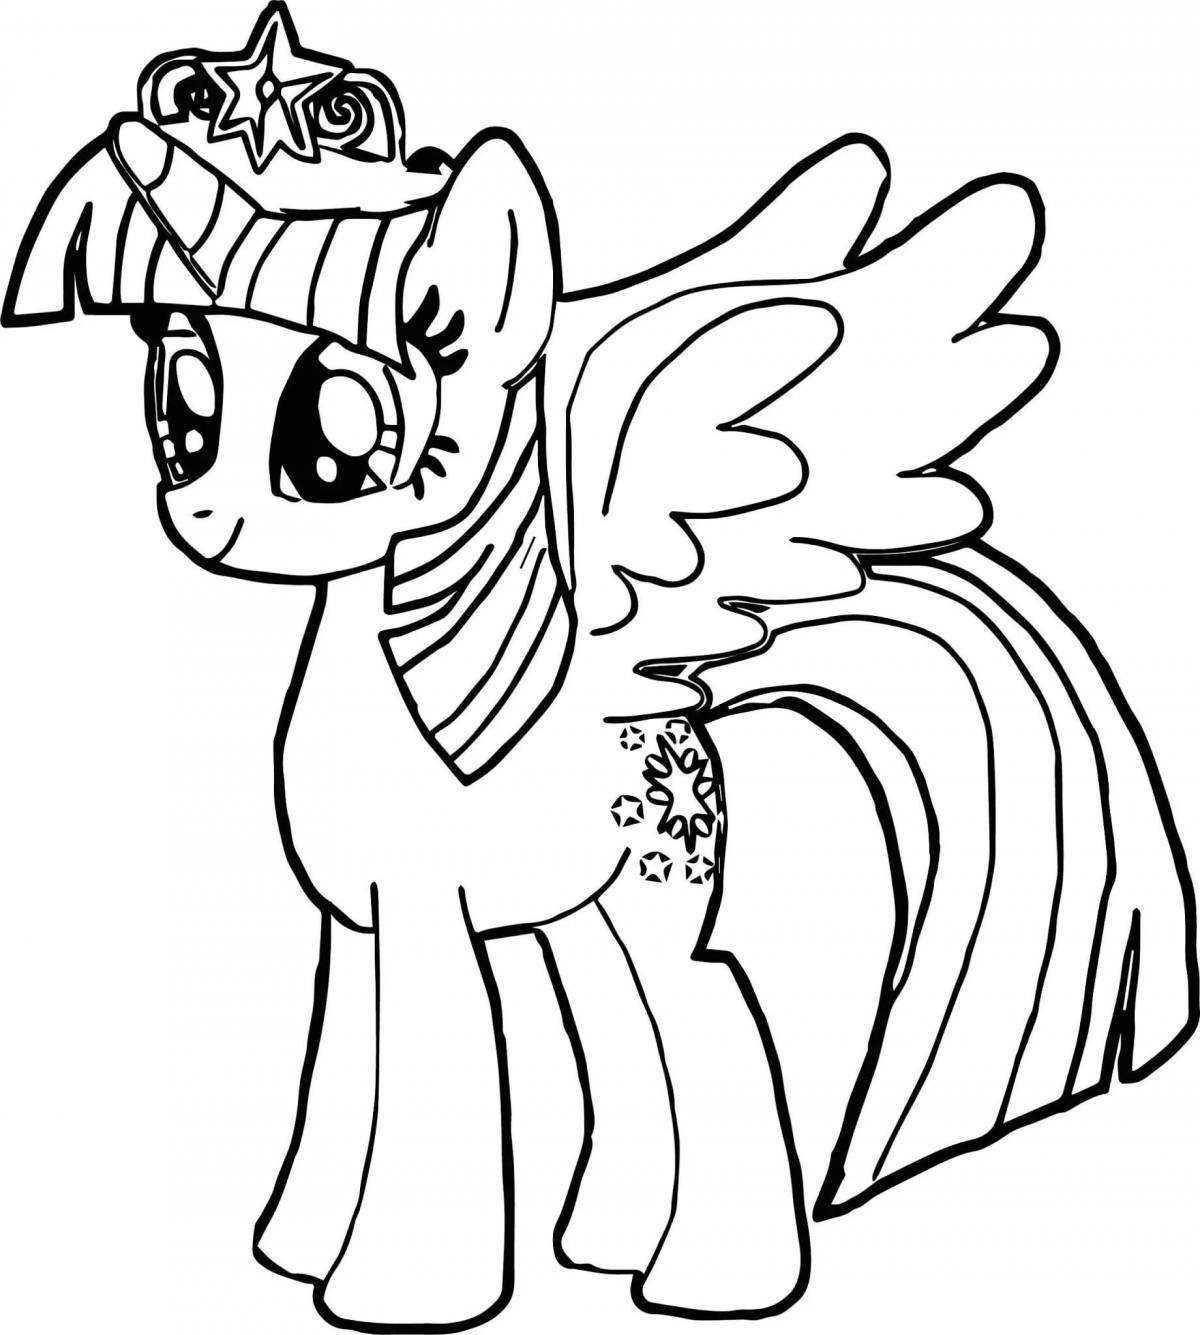 Charming sparkle little pony coloring book